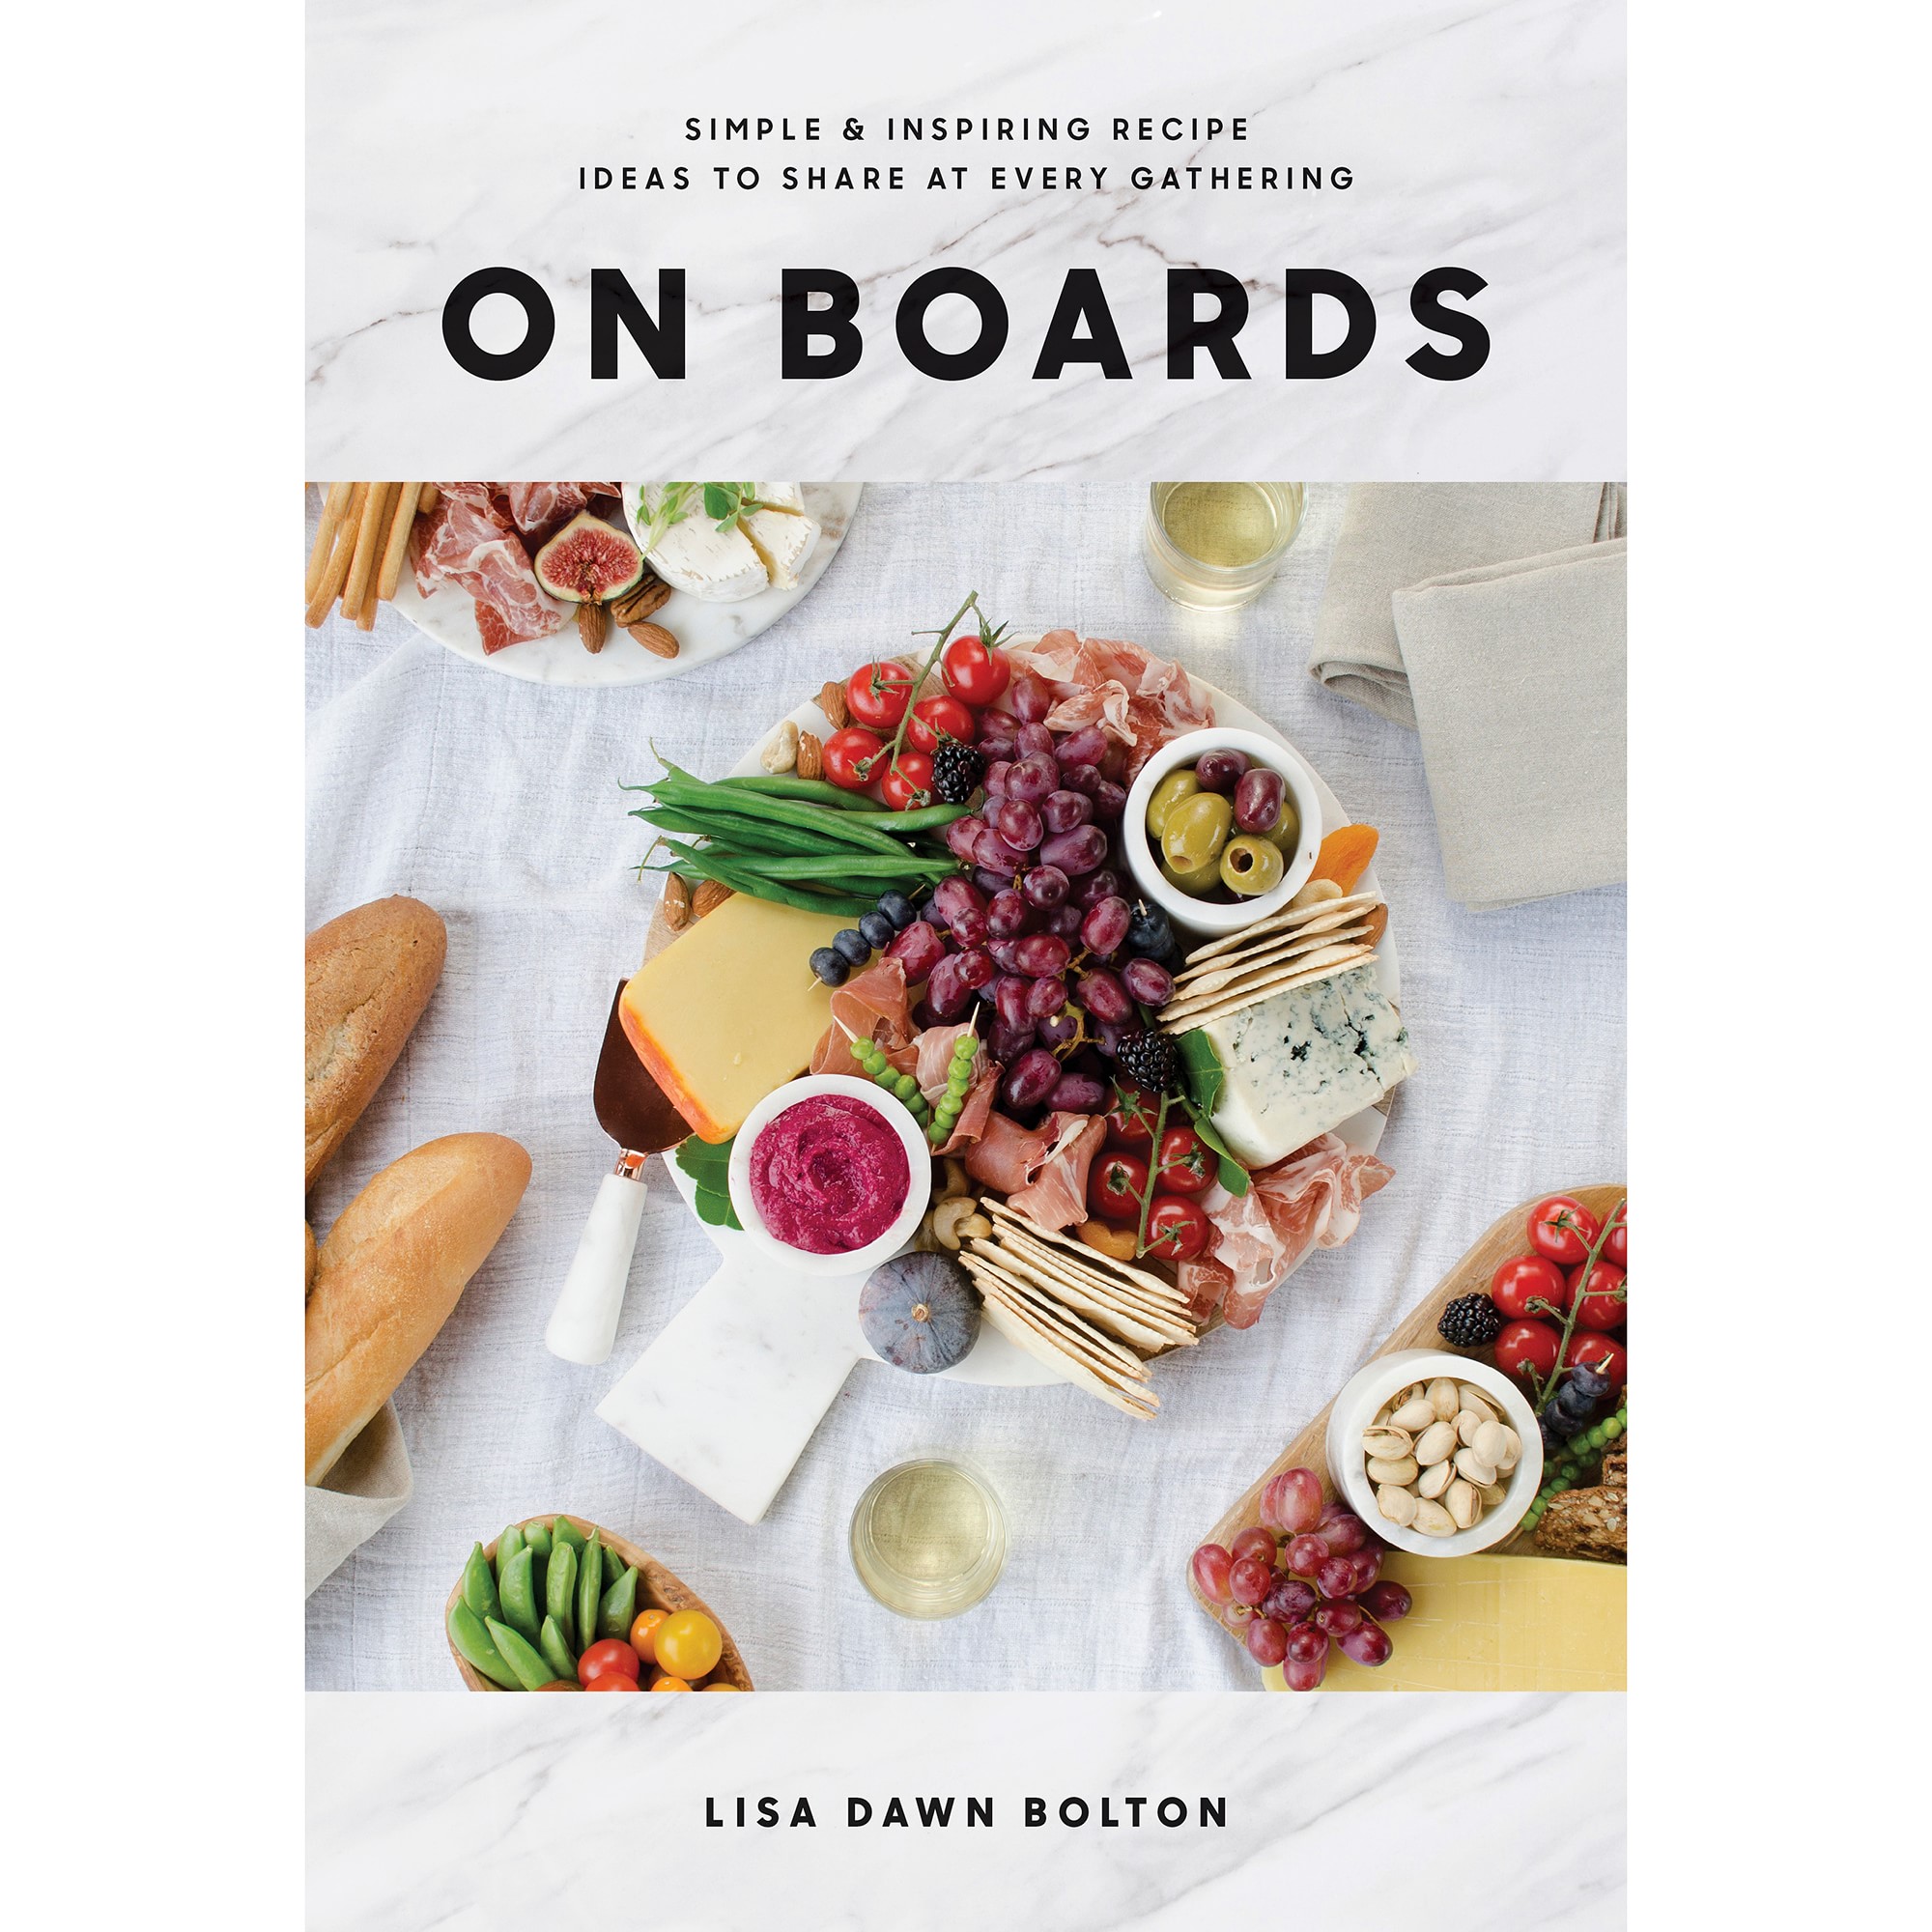 Lisa Dawn Bolton: On Boards: Simple & Inspiring Recipe Ideas to Share at Every Gathering